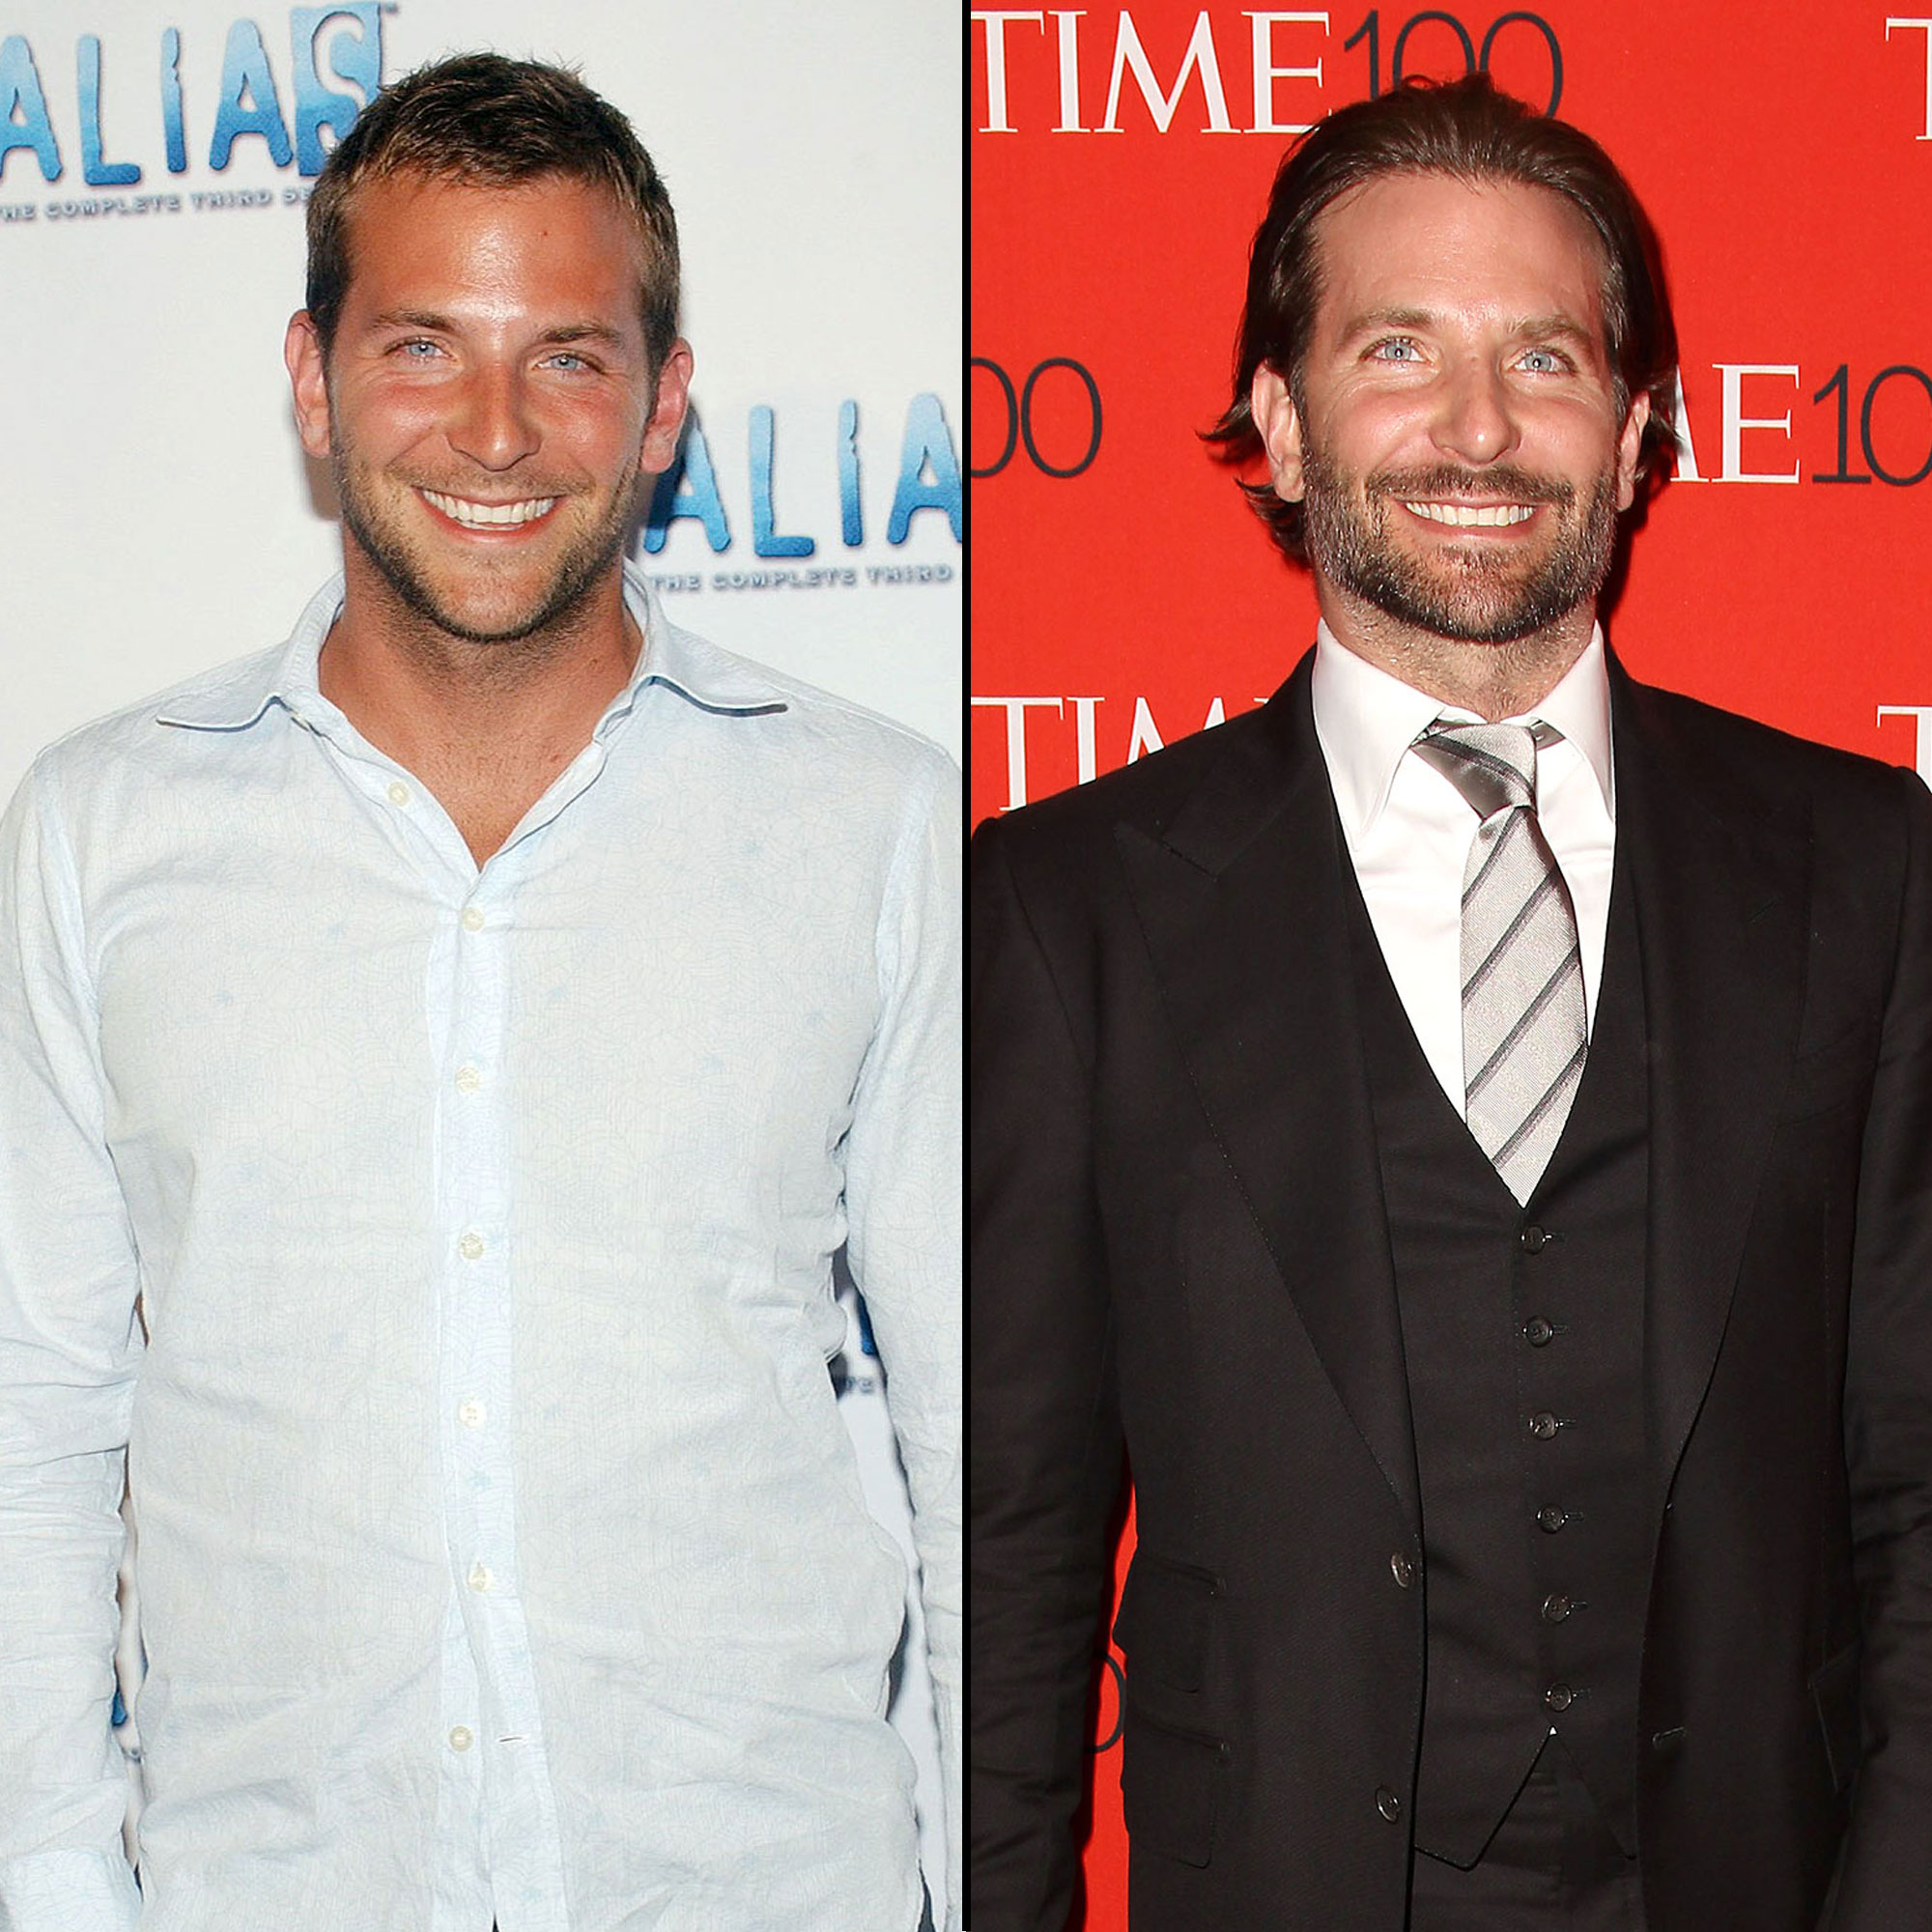 See Bradley Cooper's New Commercial!